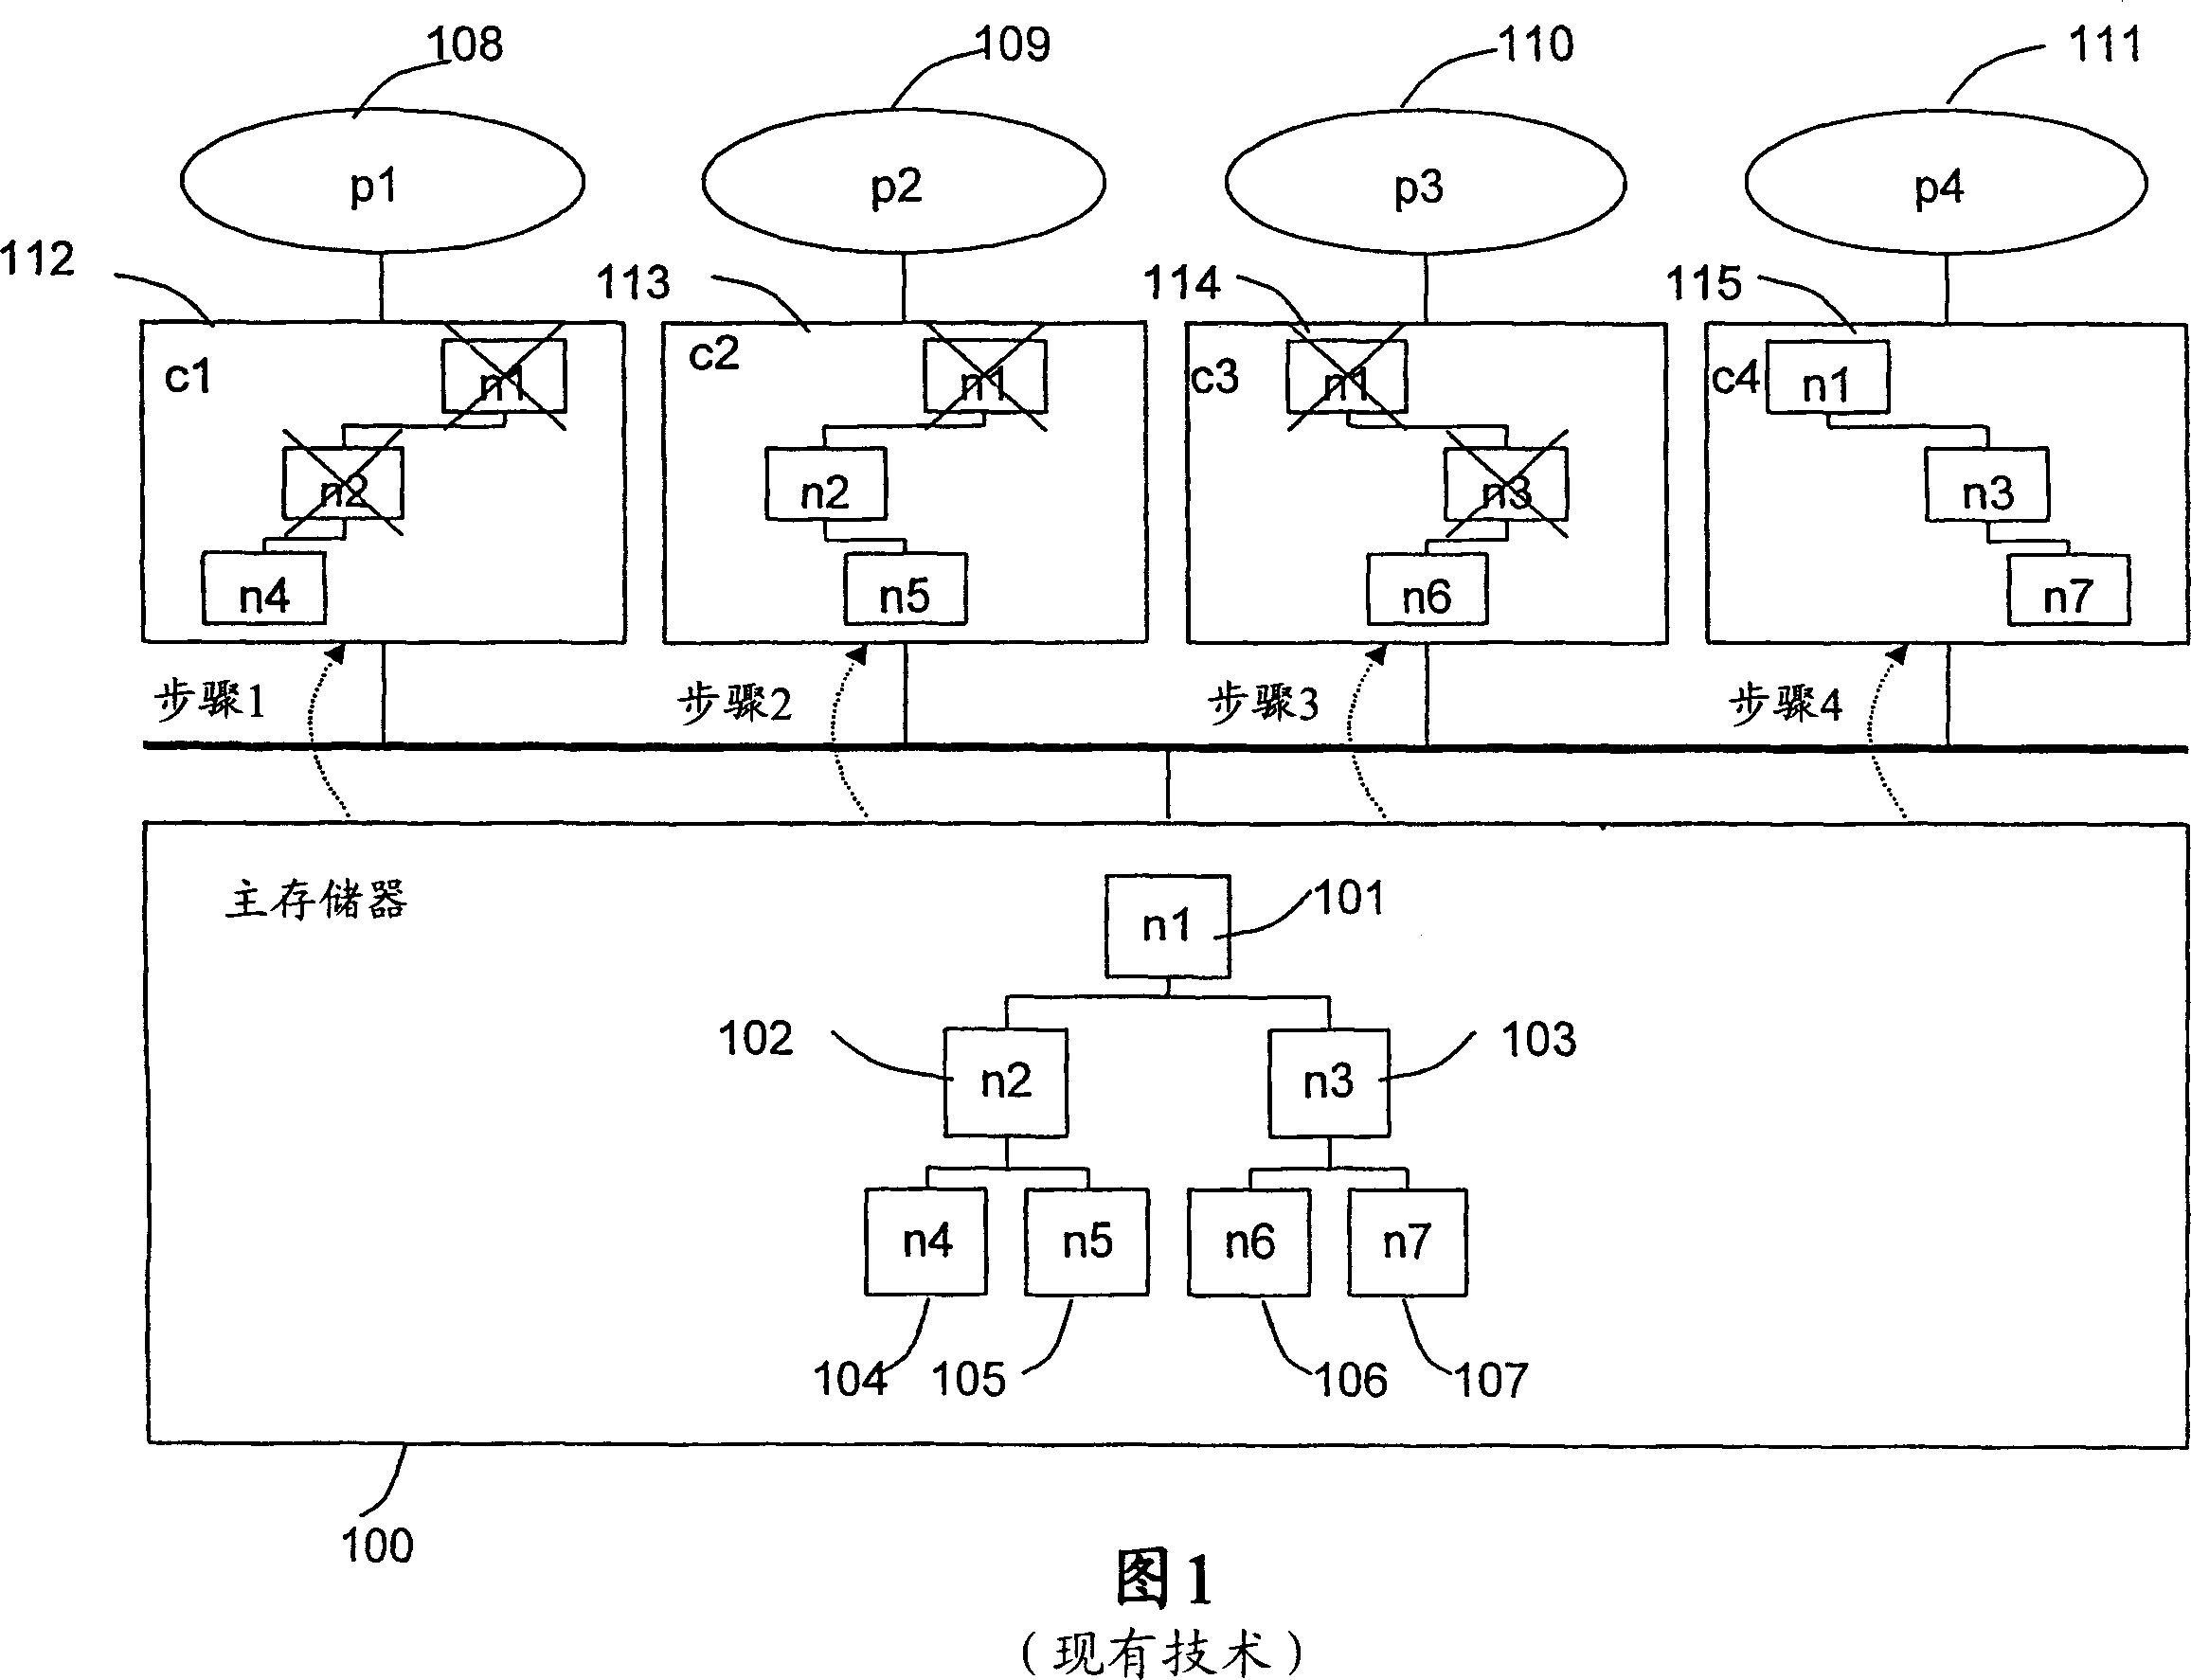 Cache-conscious concurrency control scheme for database systems